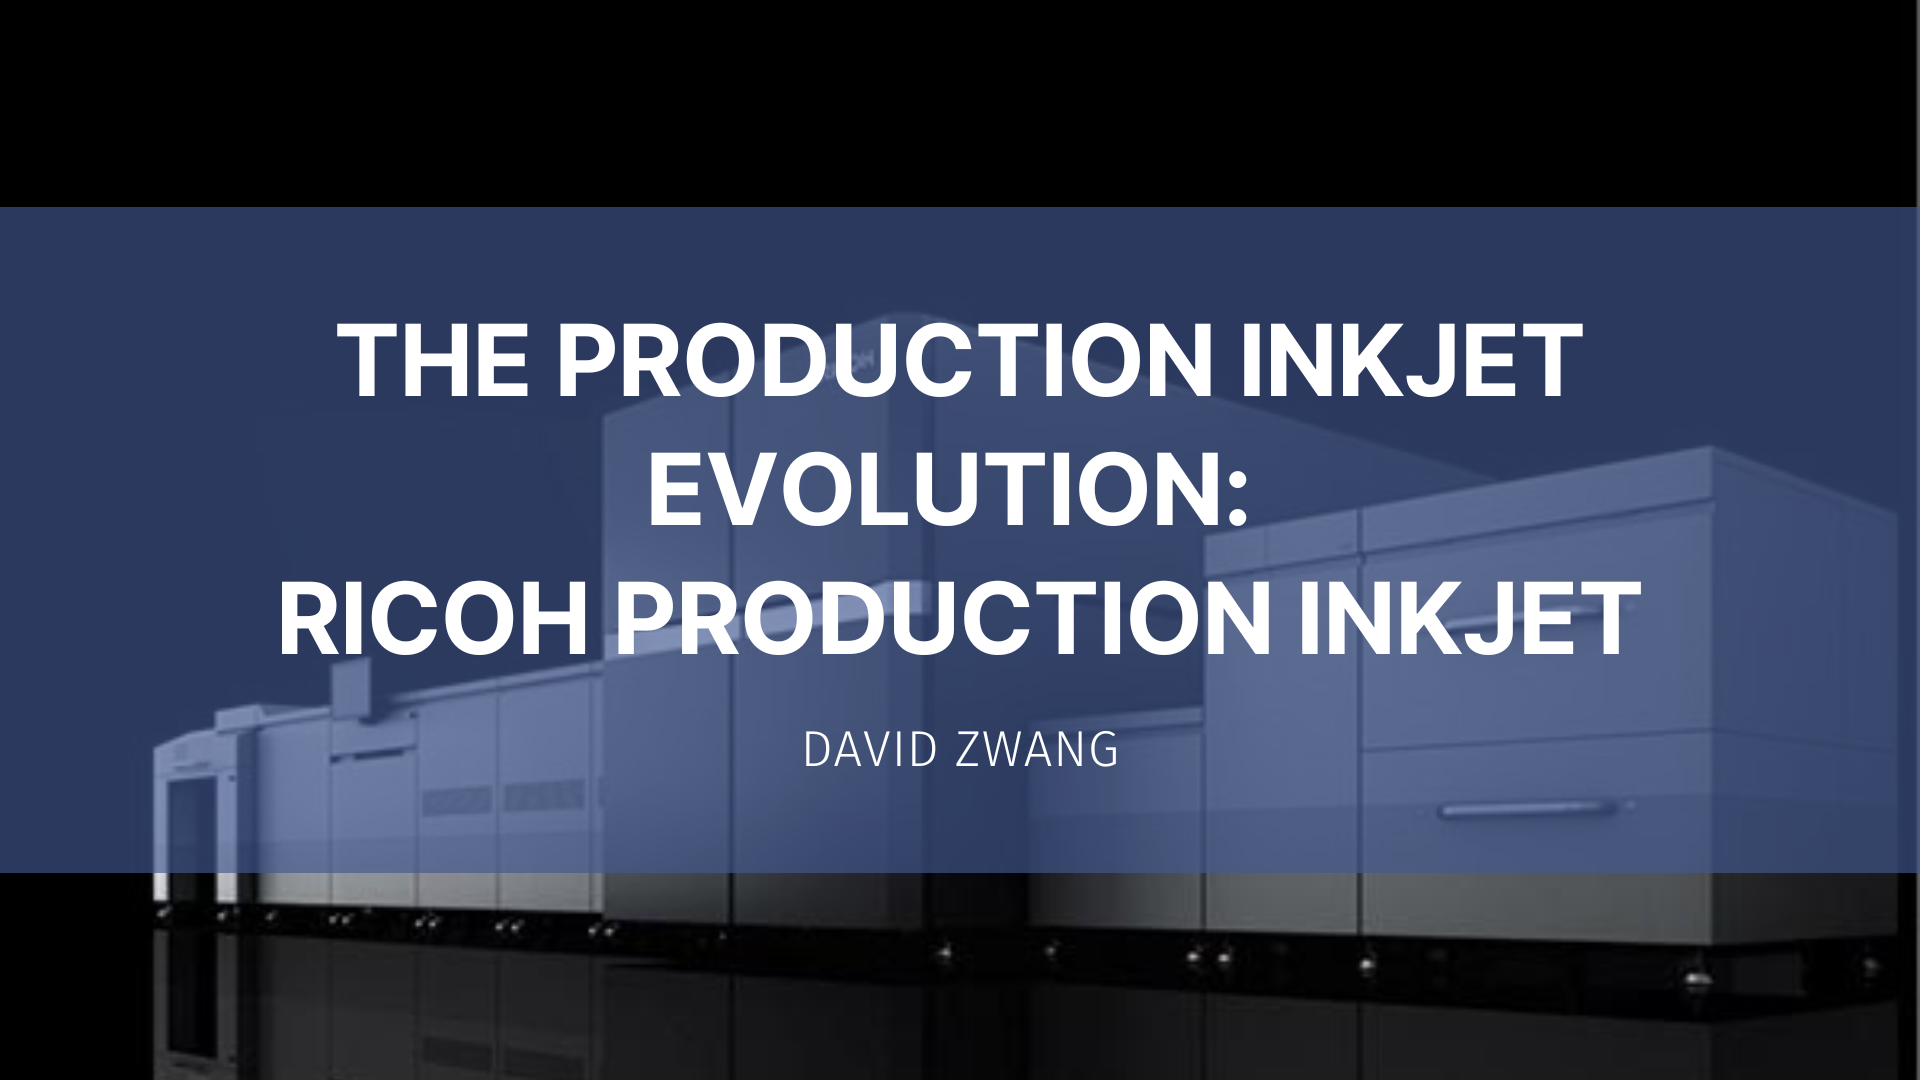 Featured image for “The Production Inkjet Evolution: Ricoh Production Inkjet”